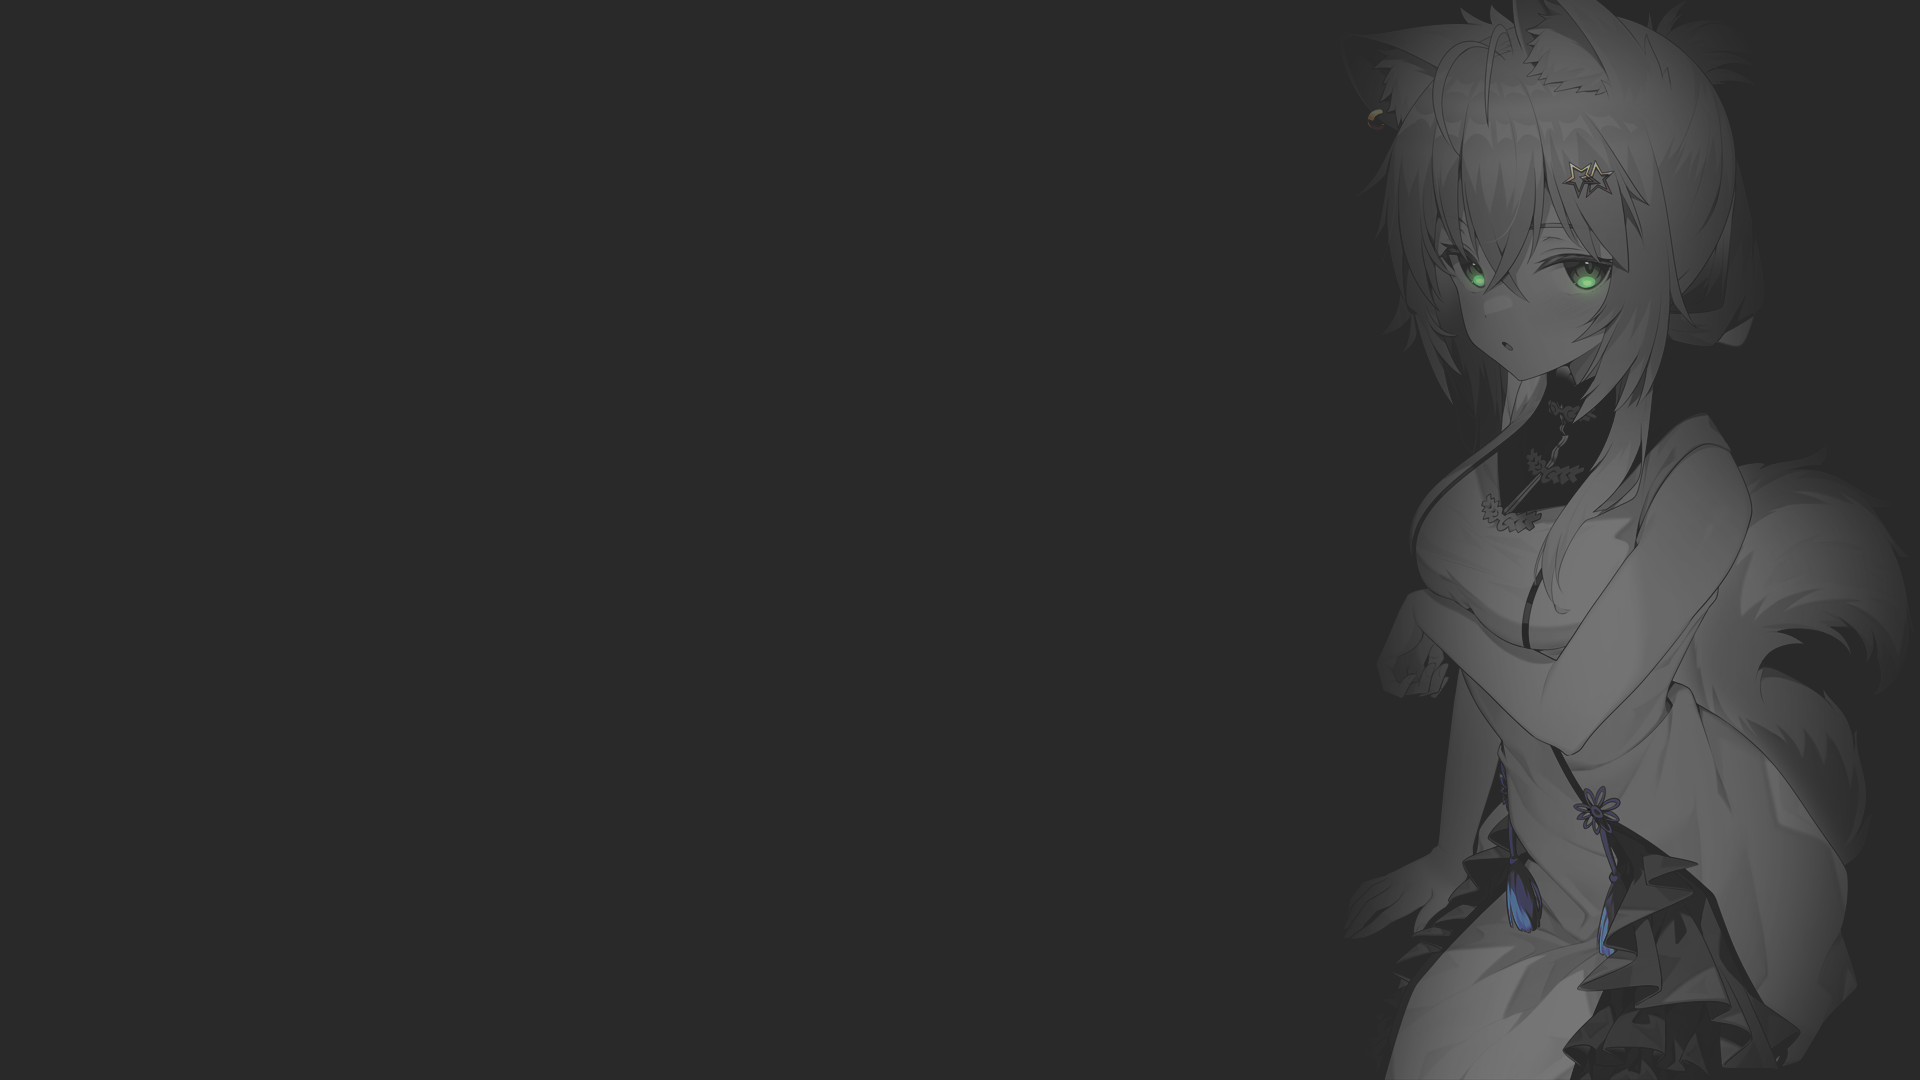 Anime 1920x1080 anime anime girls illustration monochrome dark background fan art selective coloring black background looking at viewer green eyes animal ears tail